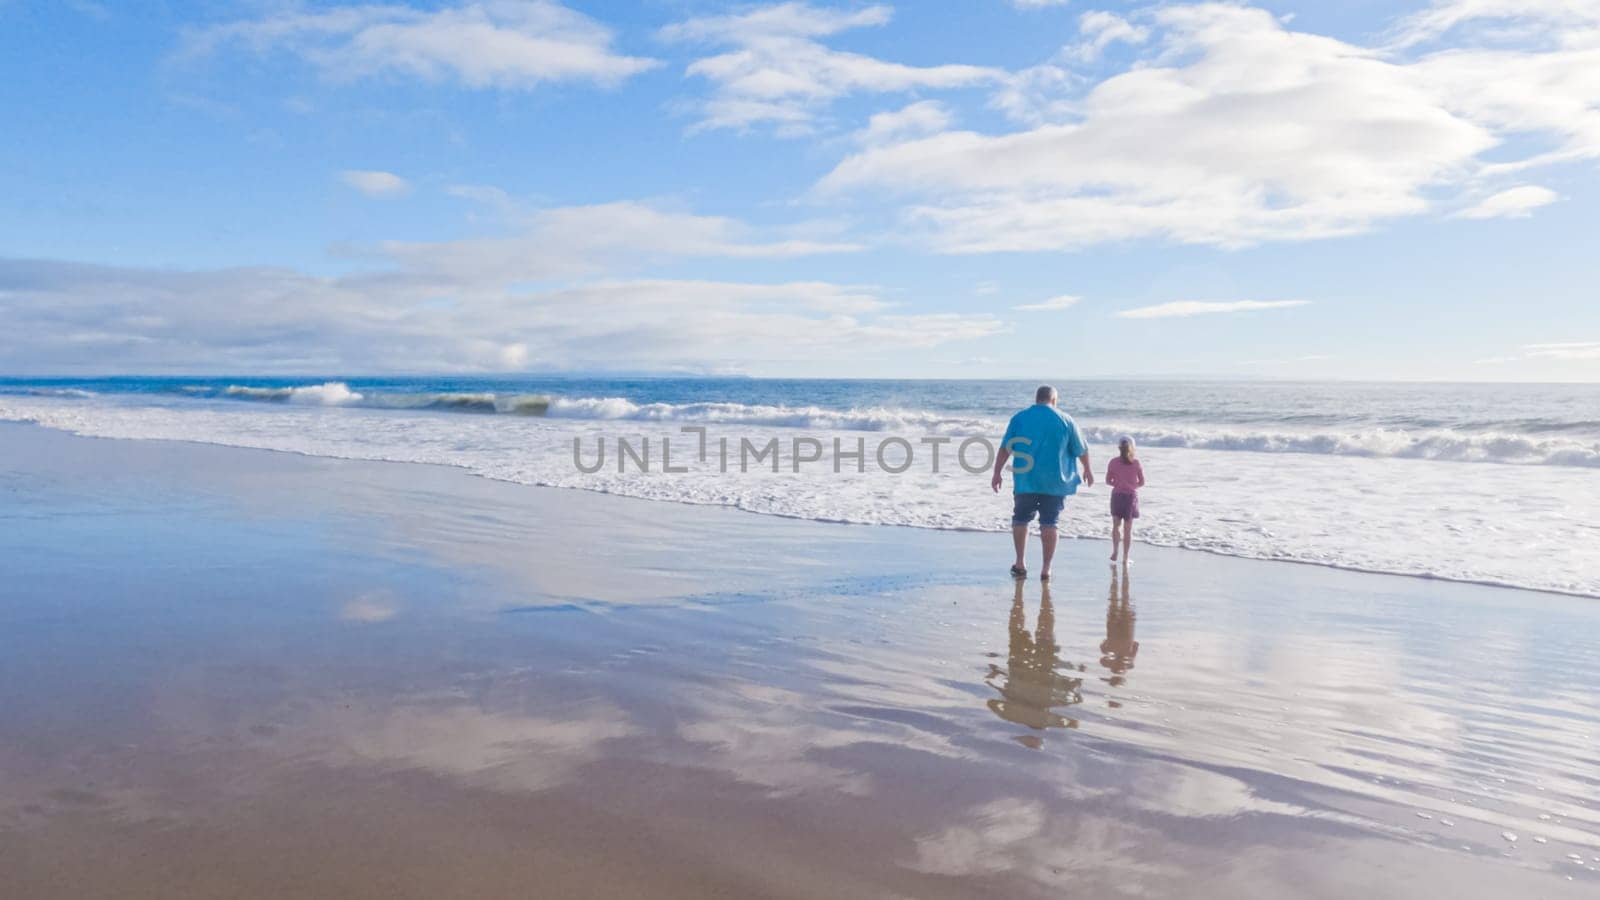 In California, a father and daughter share a serene winter walk along the deserted sands of El Capitan State Beach.